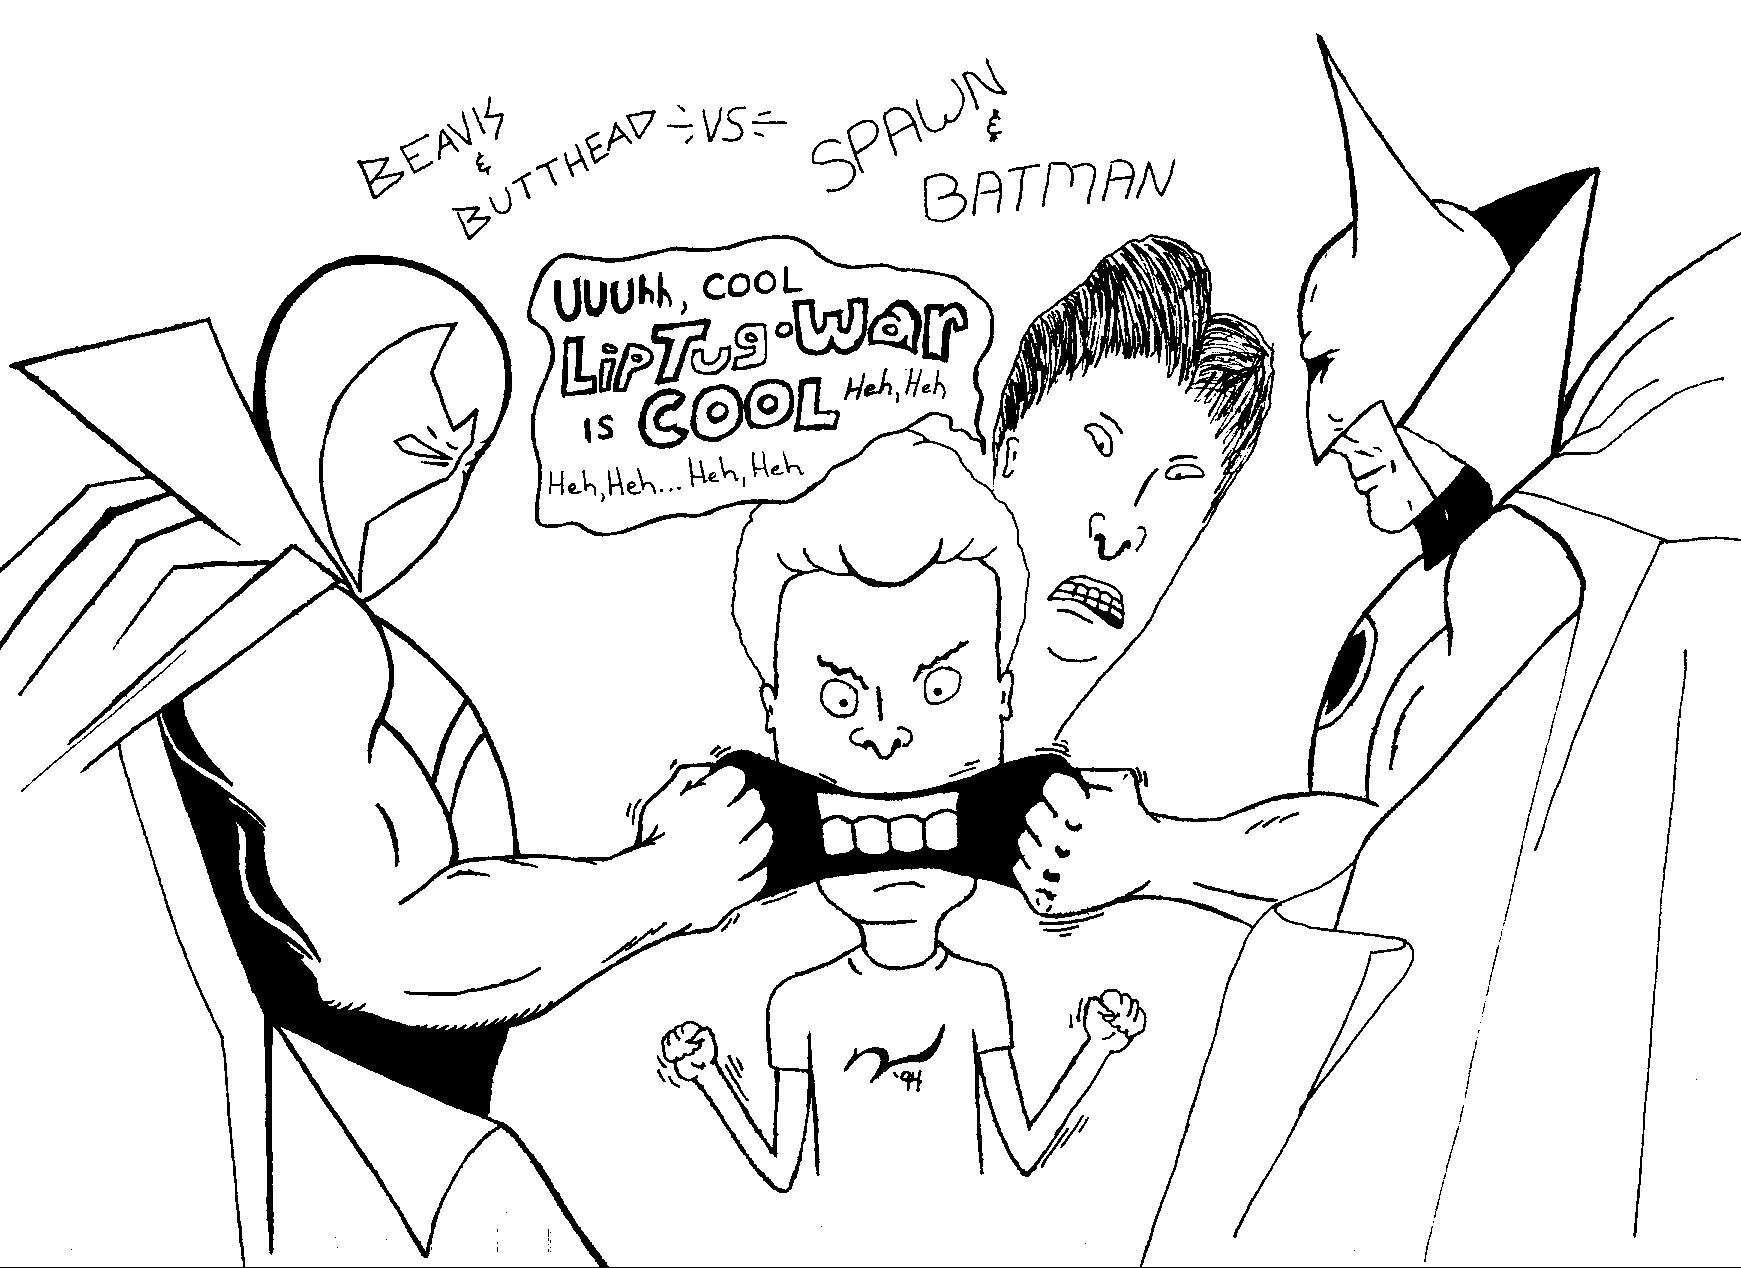 Beavis and Butthead vs. Spawn and Batman by RickyDragonLV